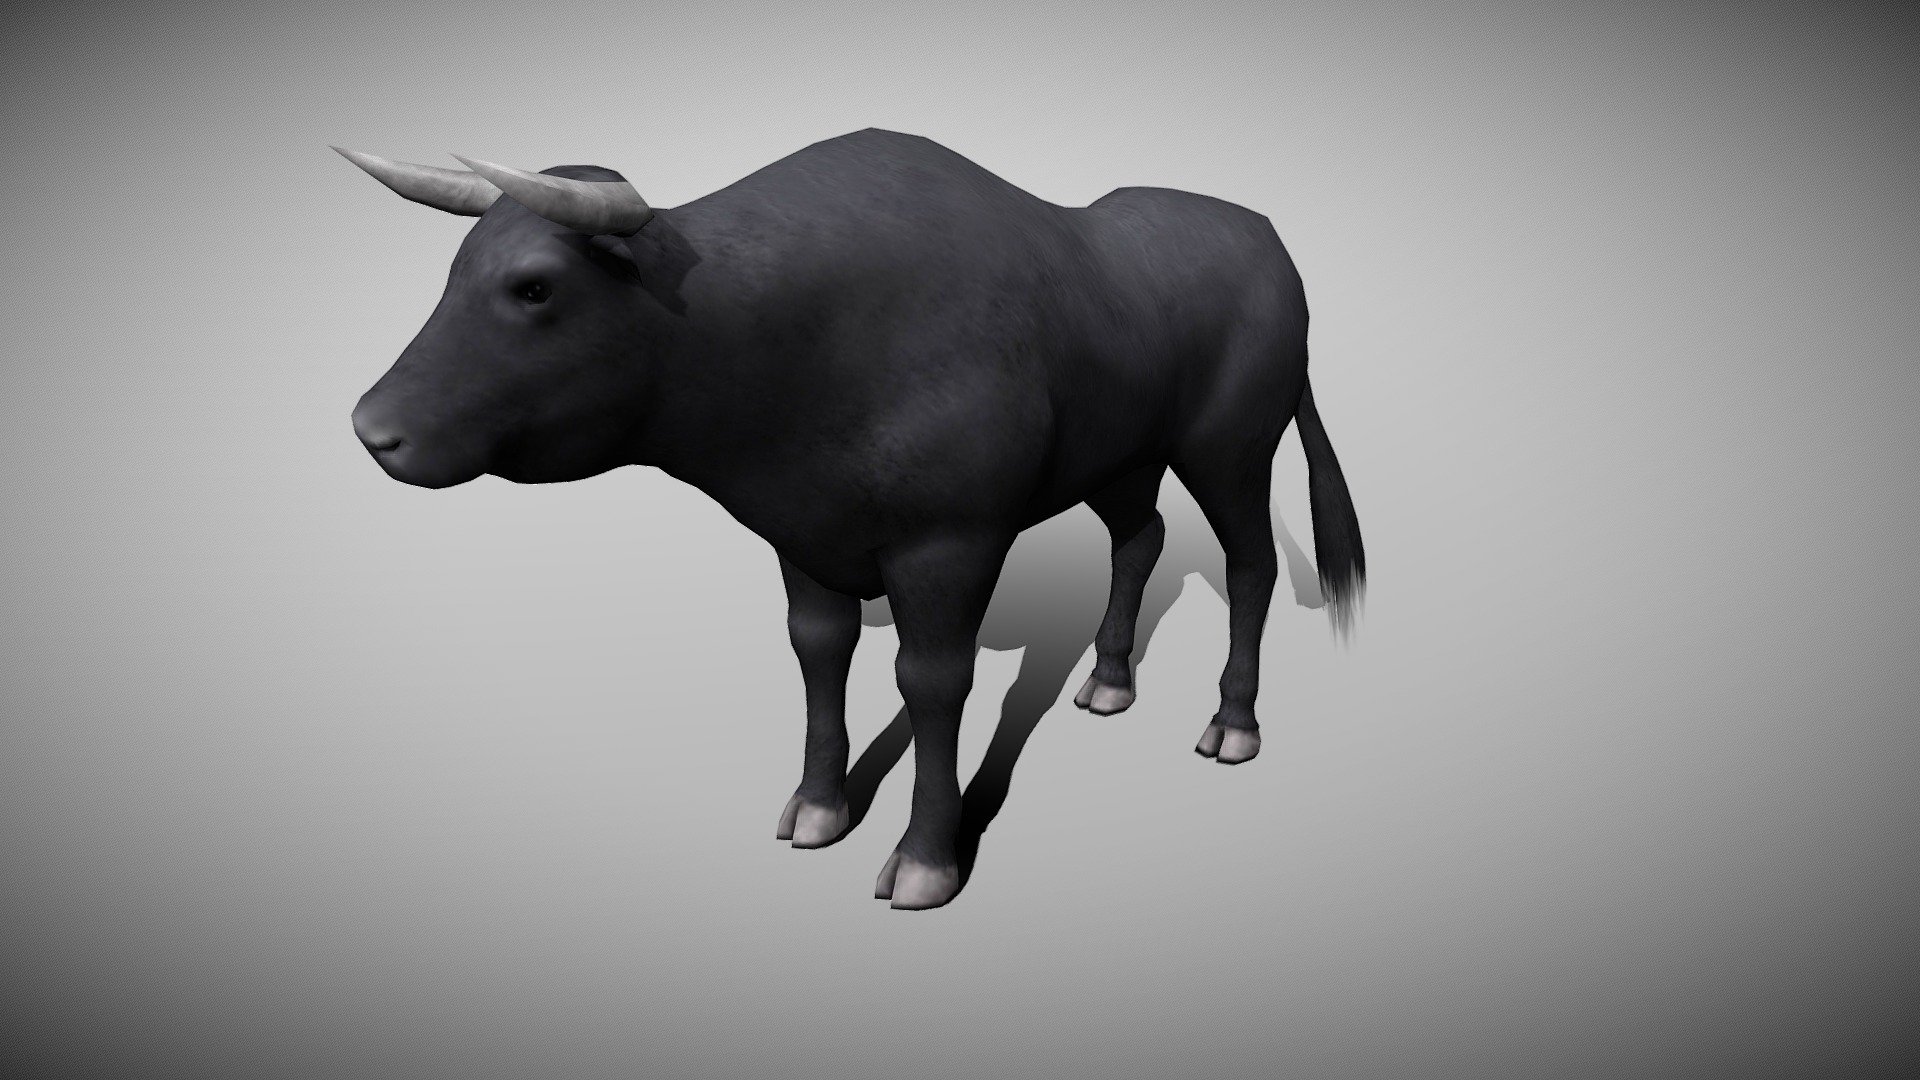 WATCH = https://youtu.be/wK6S2iVpA_o

3D REALISTIC BULL WITH ANIMATIONS

PACKAGE INCLUDE


High quality model, correctly scaled for an accurate representation of the original object.
High Detailed Photorealistic Wolf, completely UVmapped and smoothable.
Model is built to real-world scale.
Many different format like blender, fbx, obj, iclone, dae
No additional plugin is needed to open the model.
3d print ready in different poses
Separate Loopable Animations
Ready for animation
High Quality materials and textures
Triangles = 3610
Vertices = 1826
Edges = 5432
Faces = 3610

ANIMATIONS


Idle 1
Idle 2
Walk
Eat
+Many different 3d Print Poses

CONTACT US

https://sites.google.com/view/bilalcreation/contact-us - BULL ANIMATED - Buy Royalty Free 3D model by Bilal Creation Production (@bilalcreation) 3d model